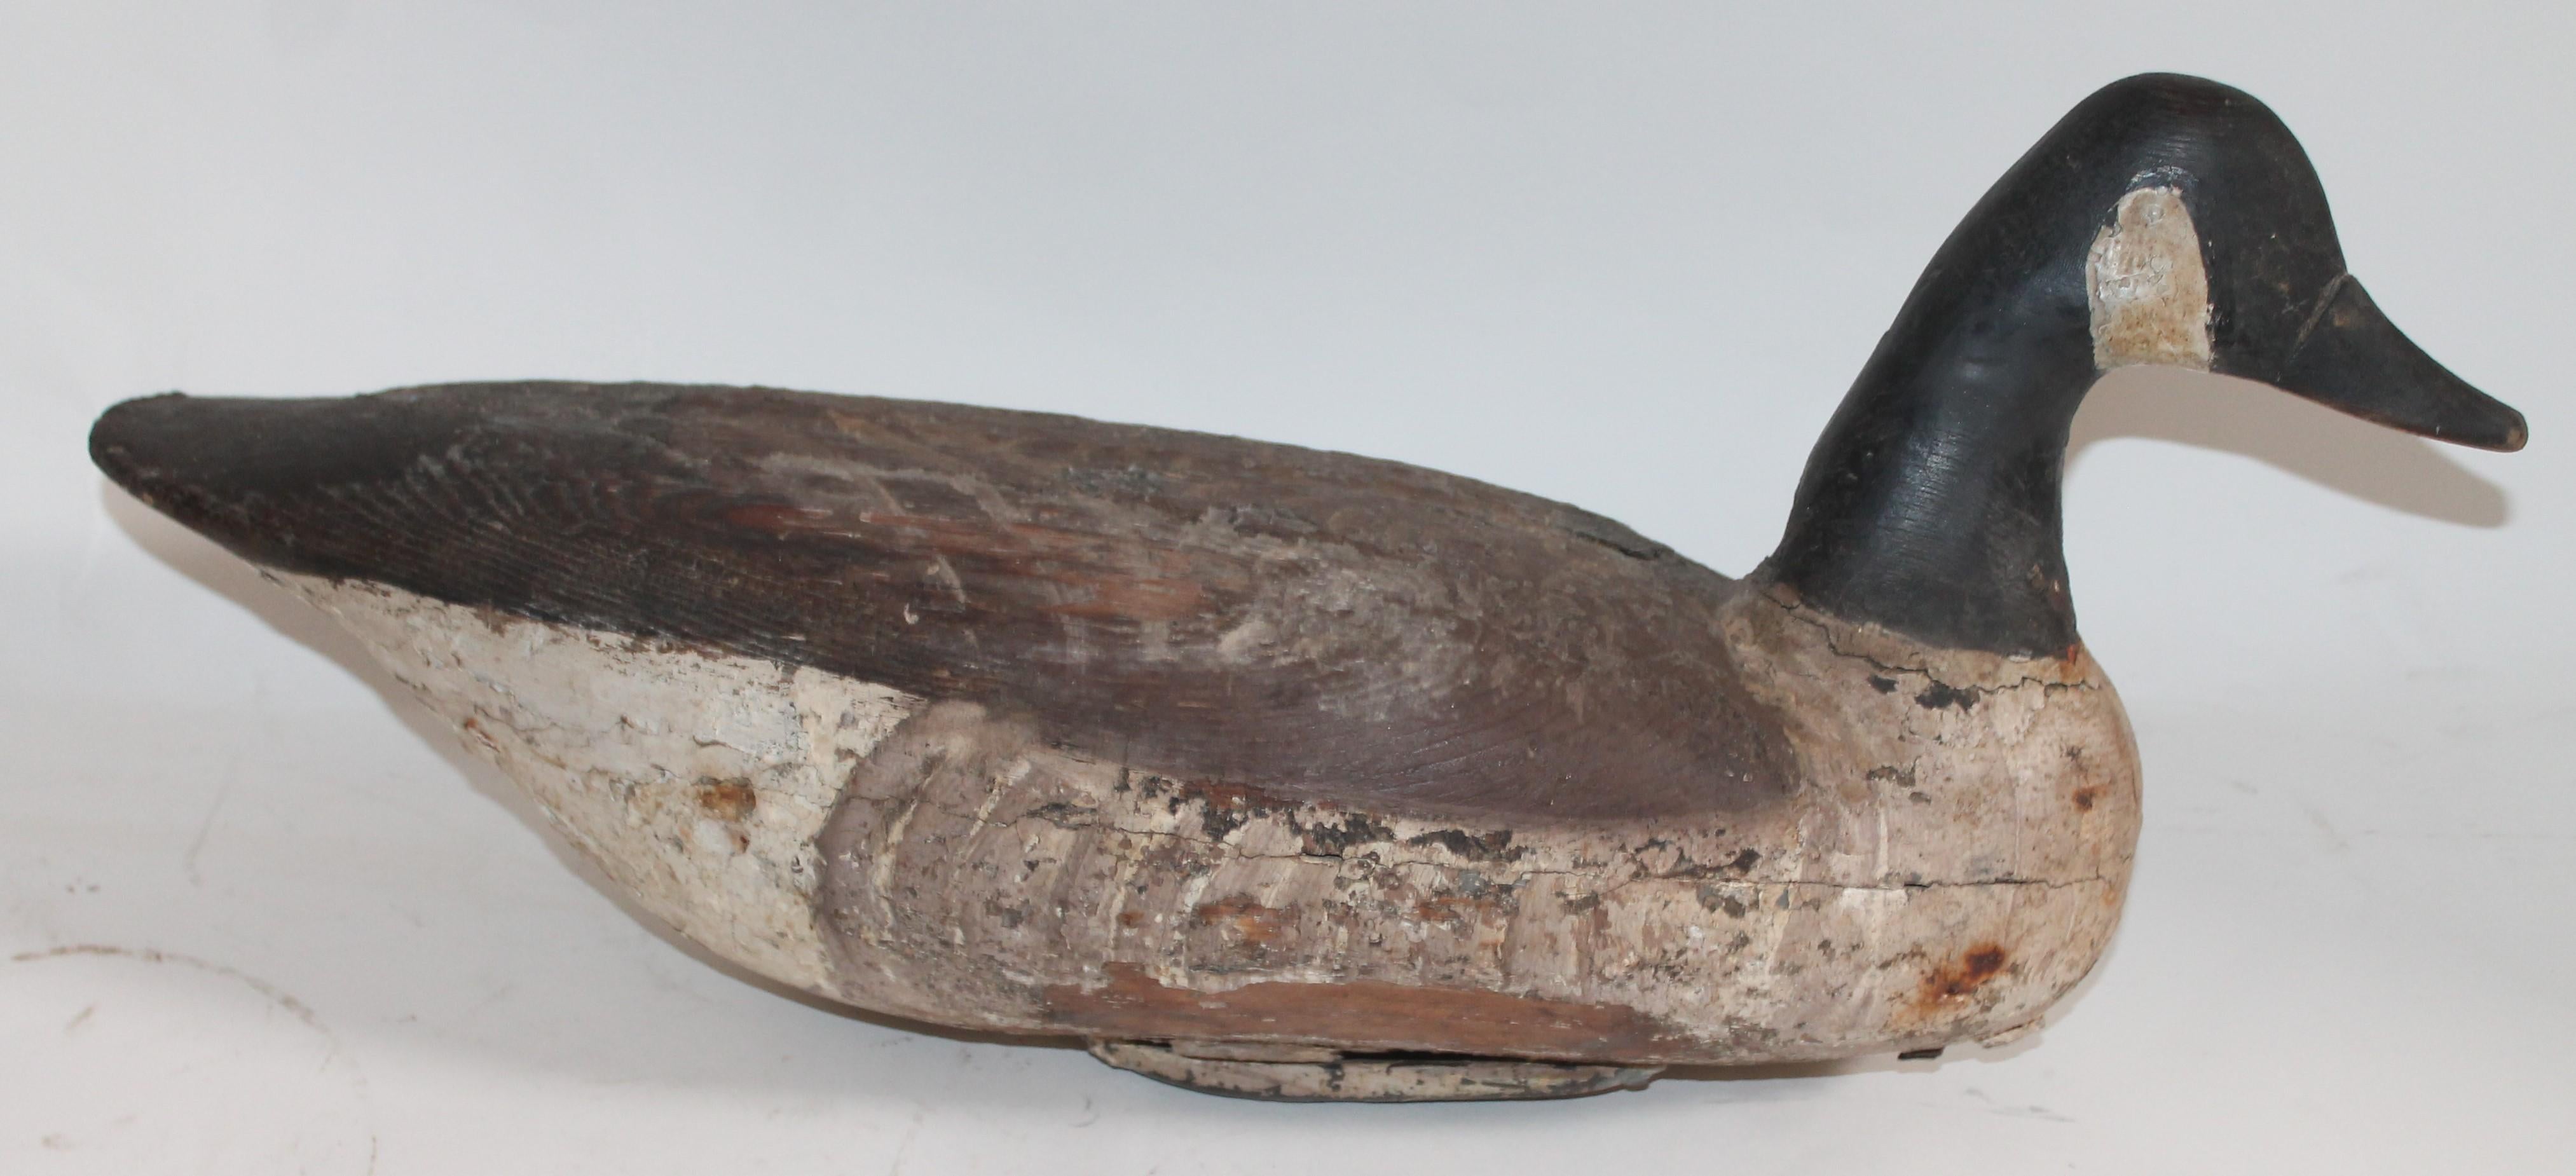 Canadian Goose - Hollow White Cedar FR Eastern Shore- Delmarva Peninsula Early 20th Century. 6693000 Studio 6/s Dewey Beach, Del. This decoy is in great untouched condition. It has the original large lead weighted bottom.